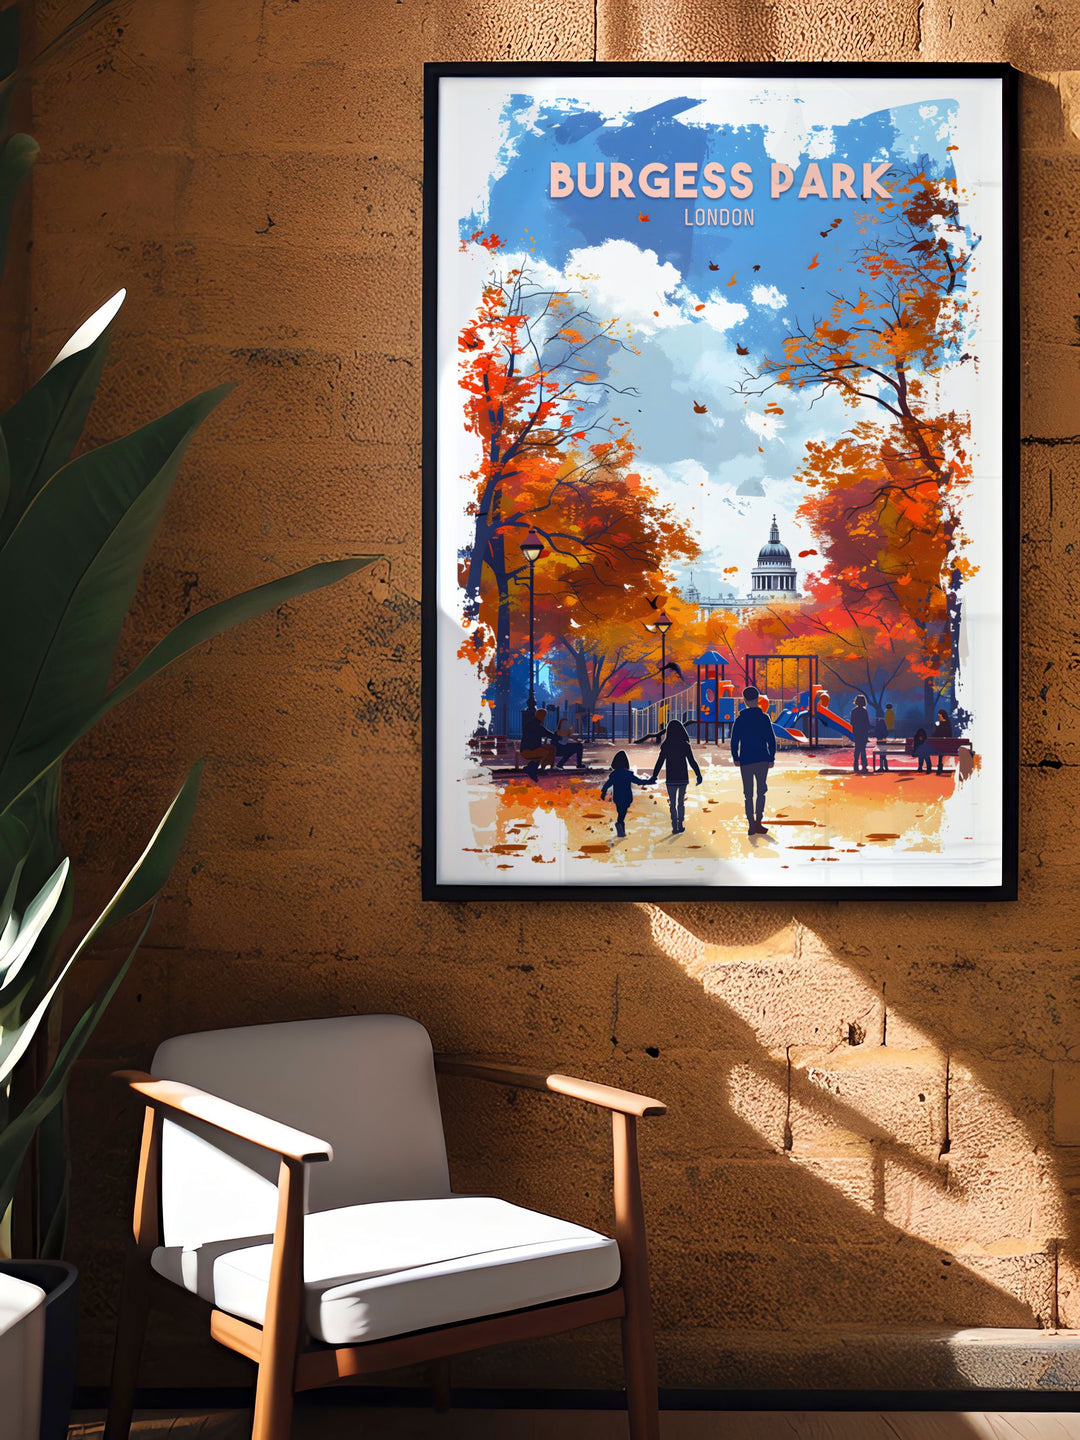 Captivating framed art of Burgess Park Playground, designed to bring the lively and inviting atmosphere of this urban green space into your home. Ideal for nature lovers and art enthusiasts alike.